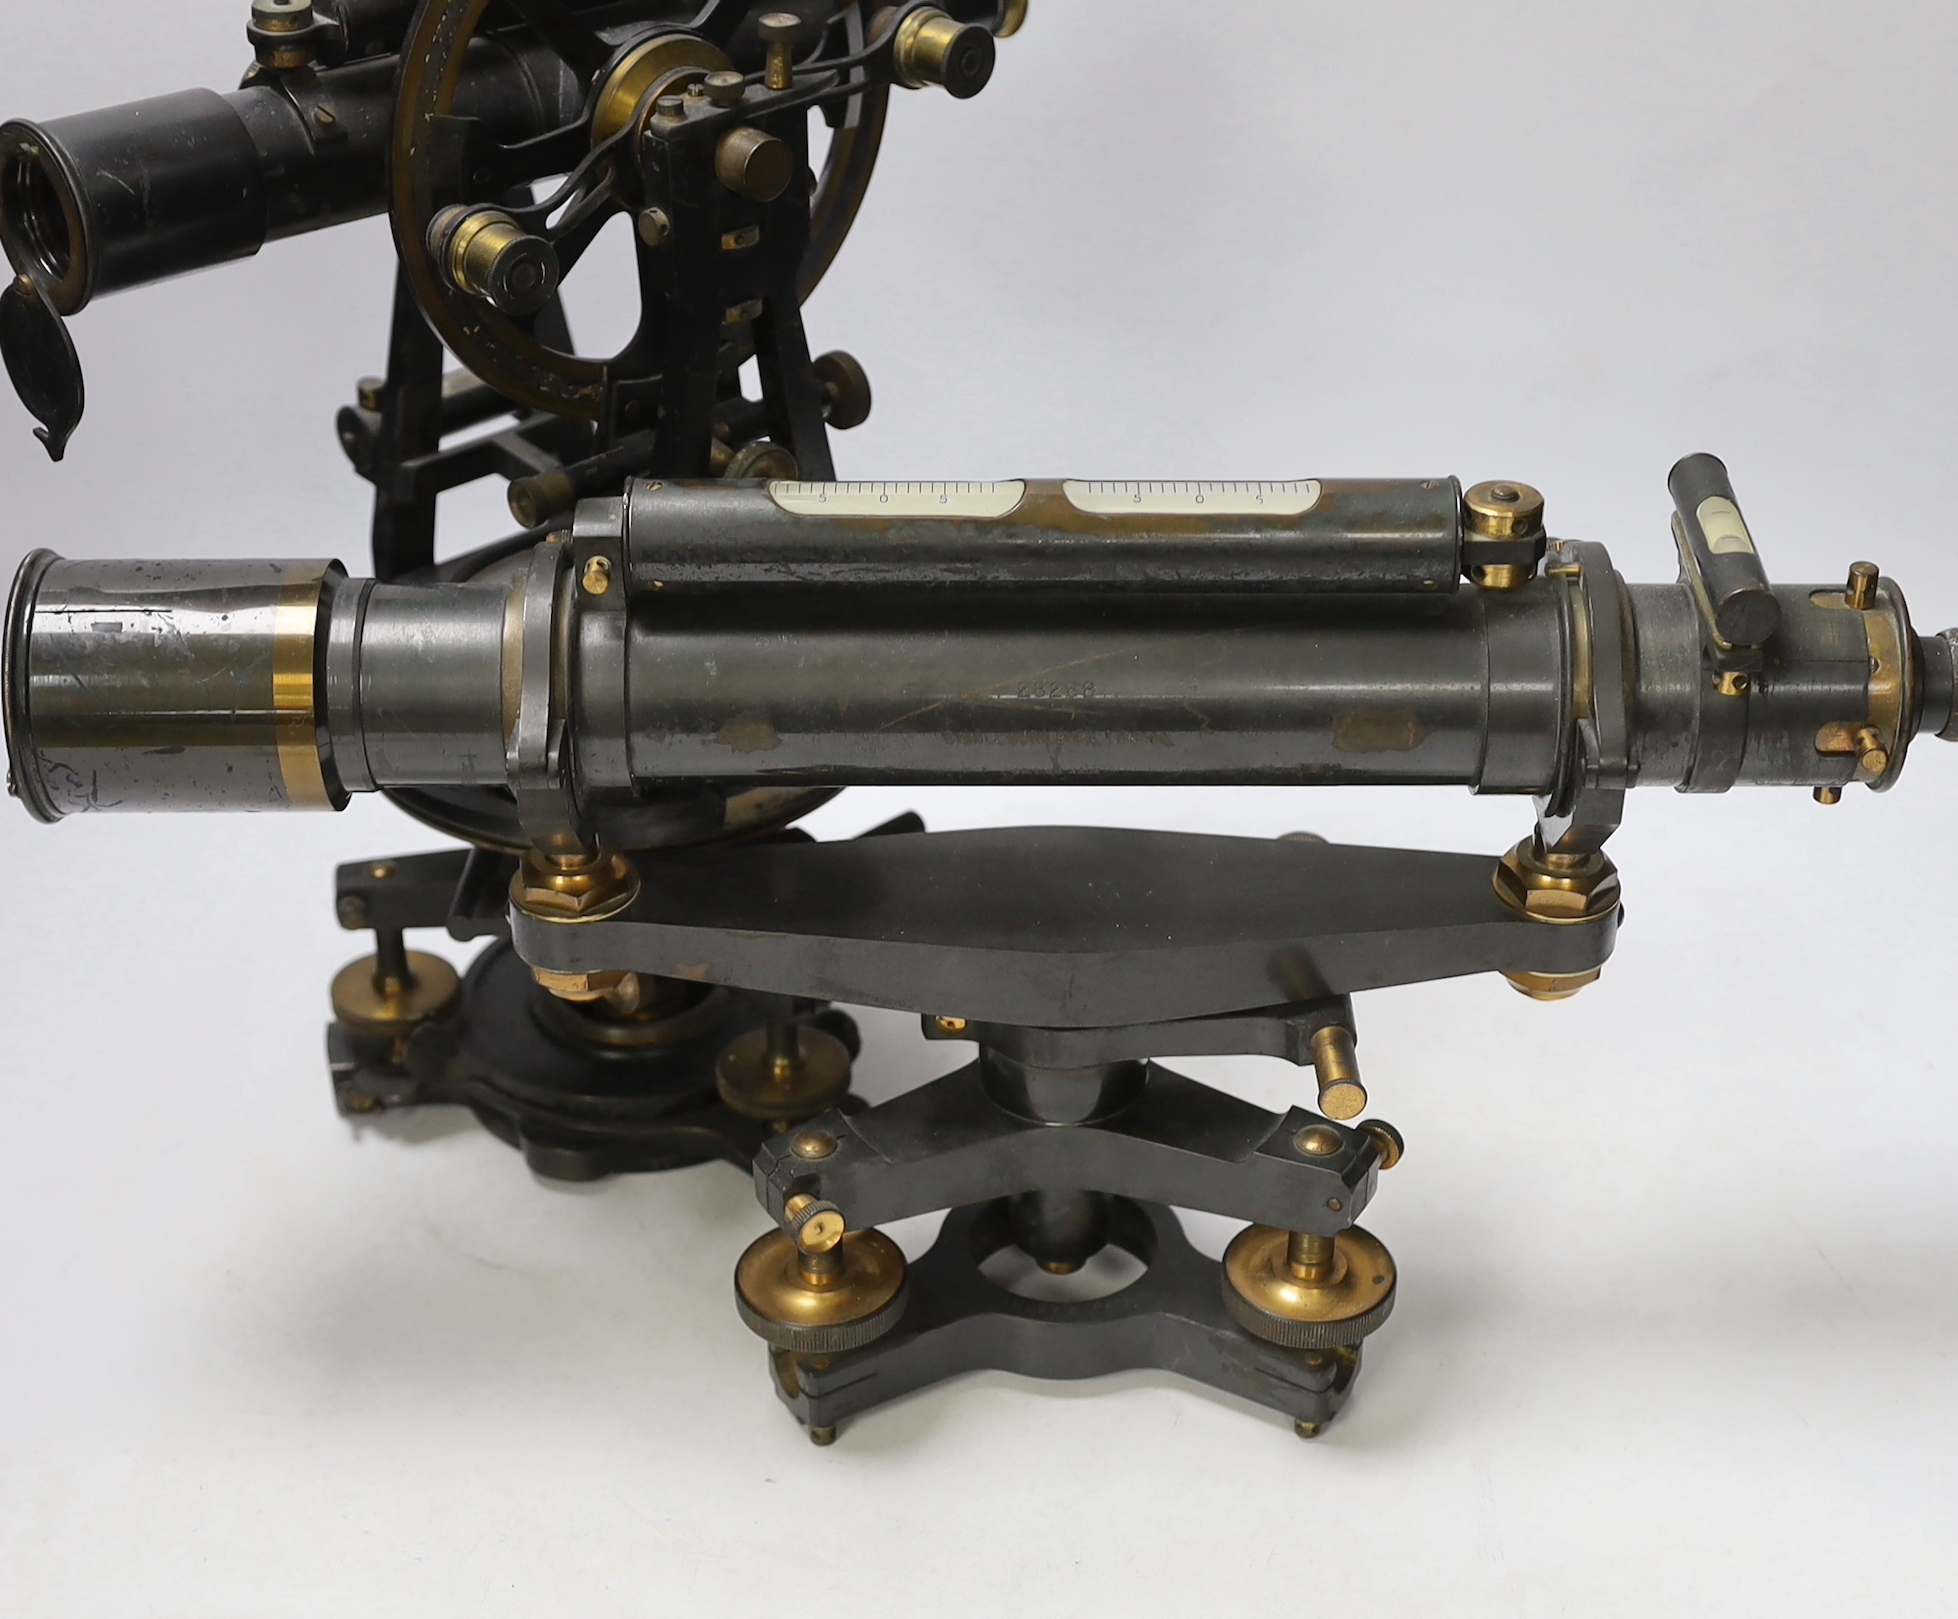 An early 20th century micrometer theodolite by Heath & Co. ‘Hezzanith’, Crawford, London, and an - Image 2 of 5